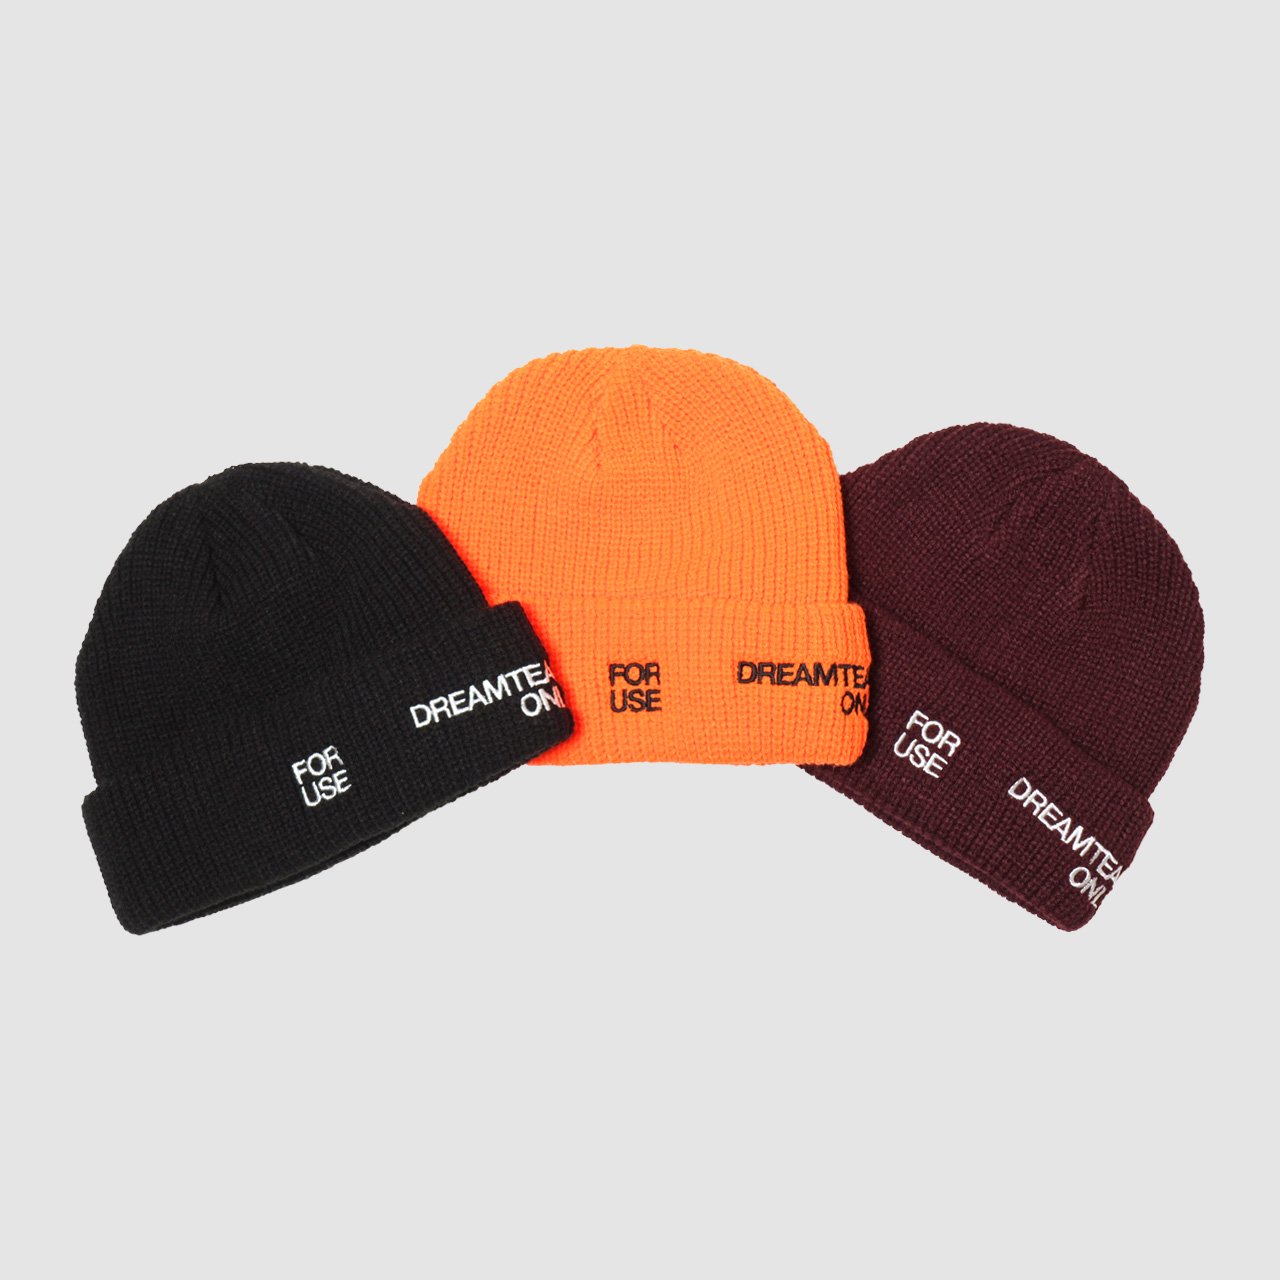 <img class='new_mark_img1' src='https://img.shop-pro.jp/img/new/icons20.gif' style='border:none;display:inline;margin:0px;padding:0px;width:auto;' />DT-731 : FOR DT USE ONLY Beanie Cap